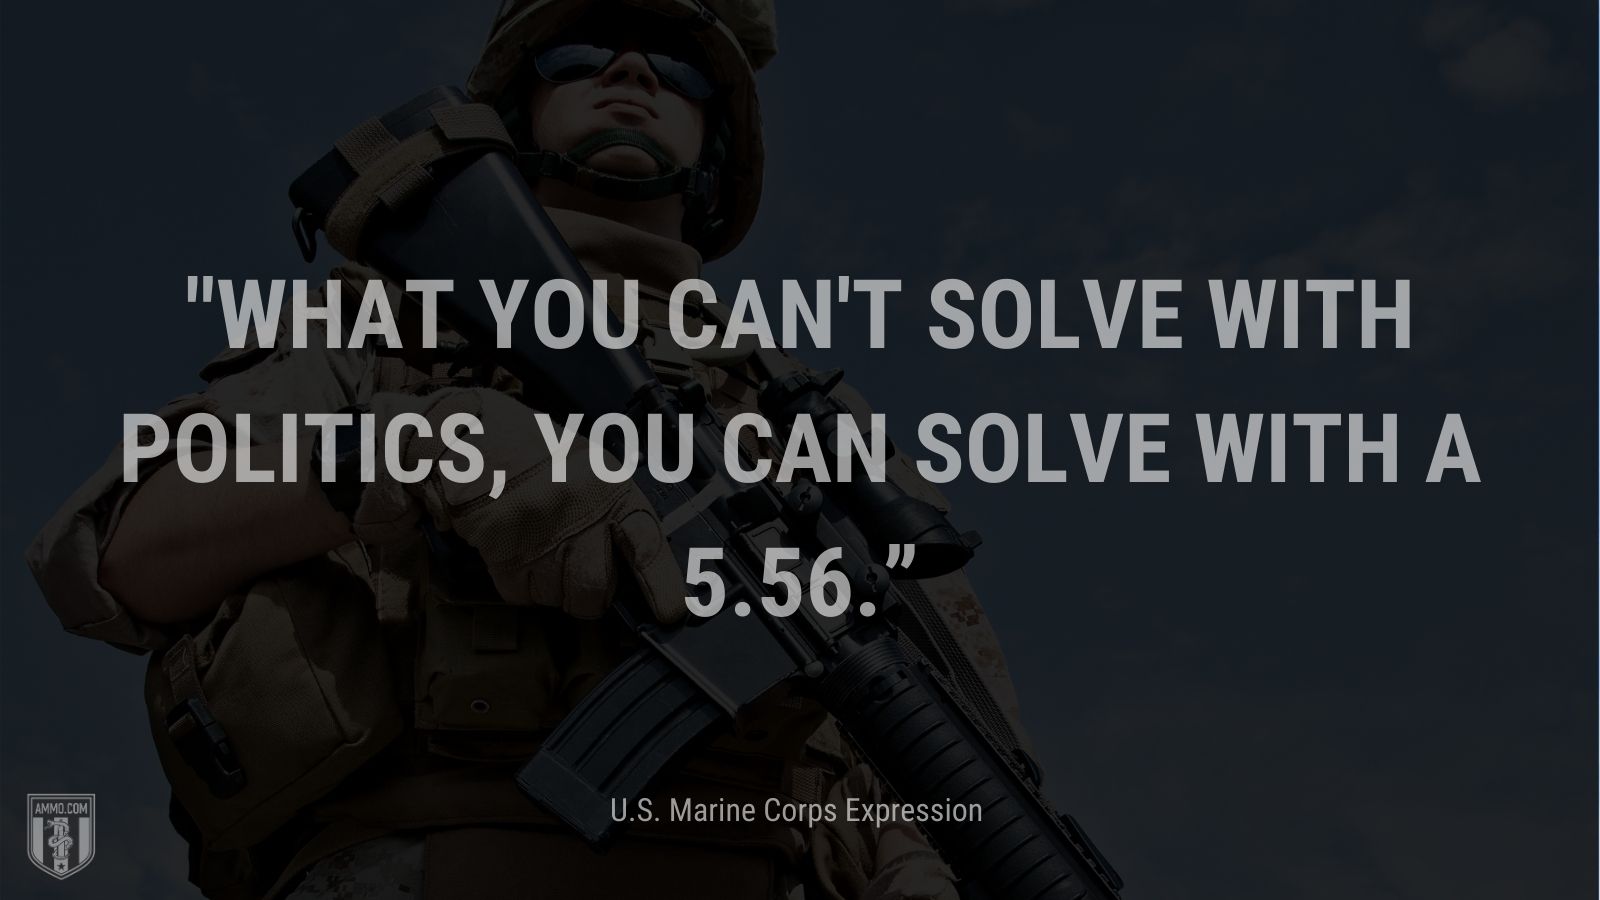 “What you can't solve with politics, you can solve with a 5.56.” - U.S. Marine Corps Expression